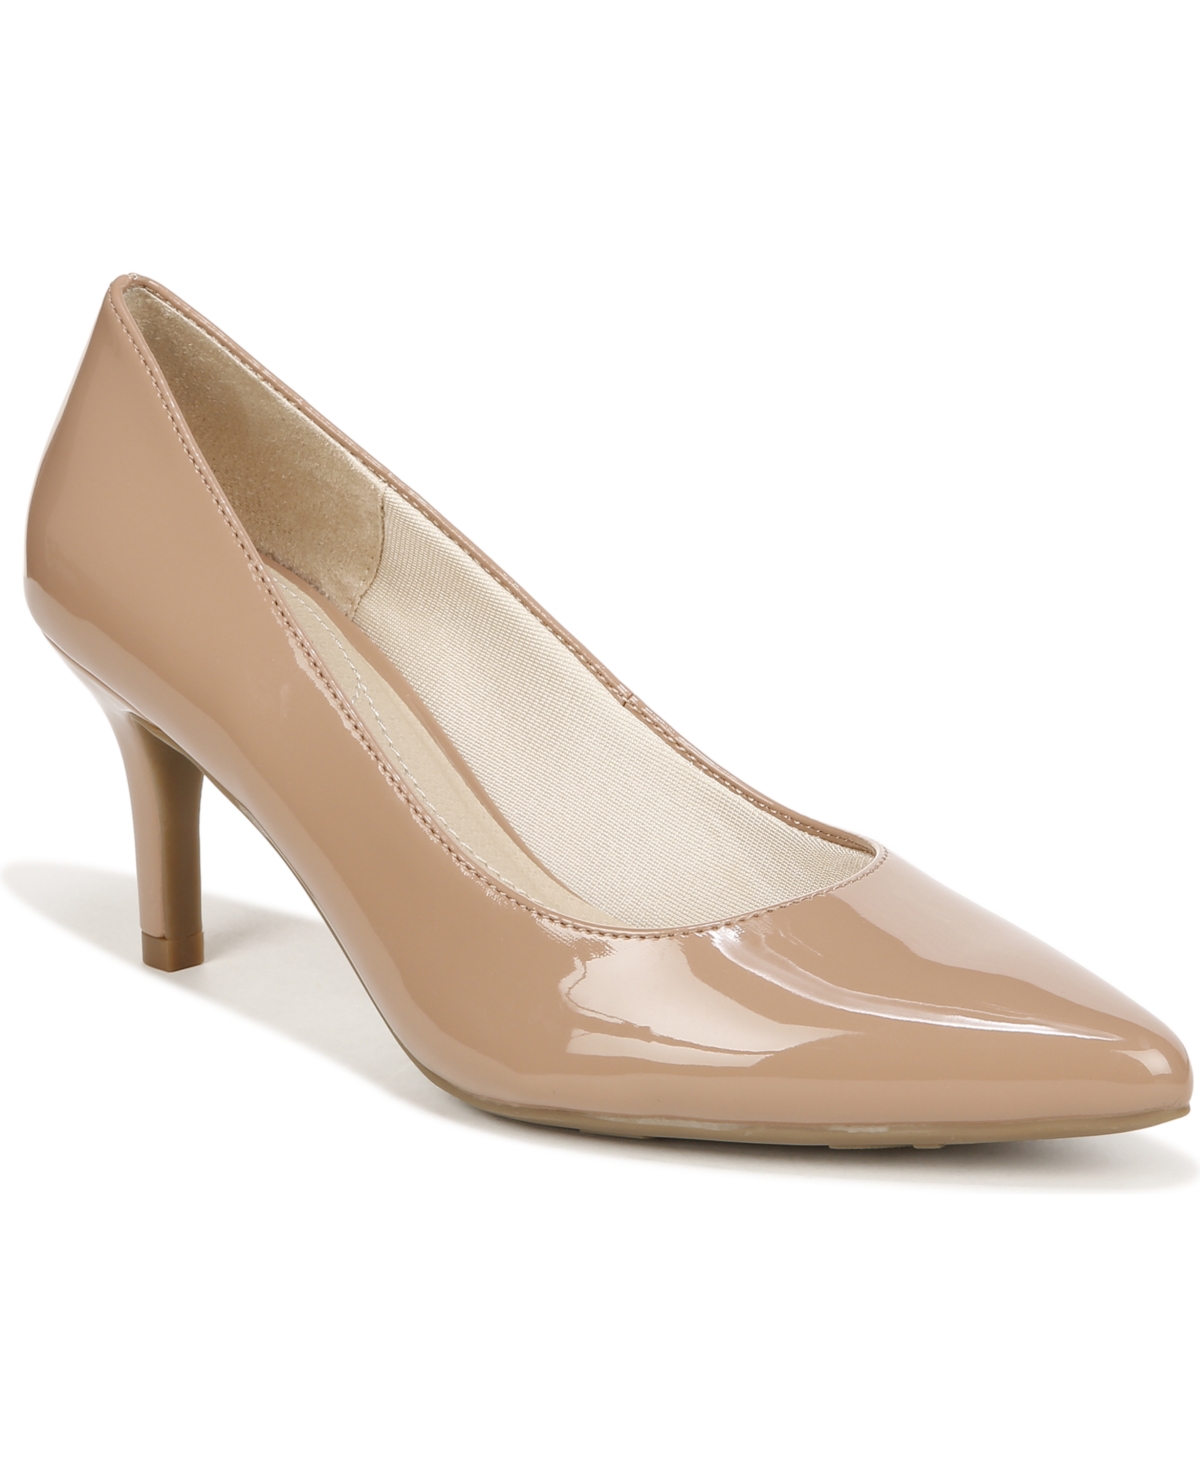 Women's Sevyn Pointed Toe Pumps - Stone Faux Leather